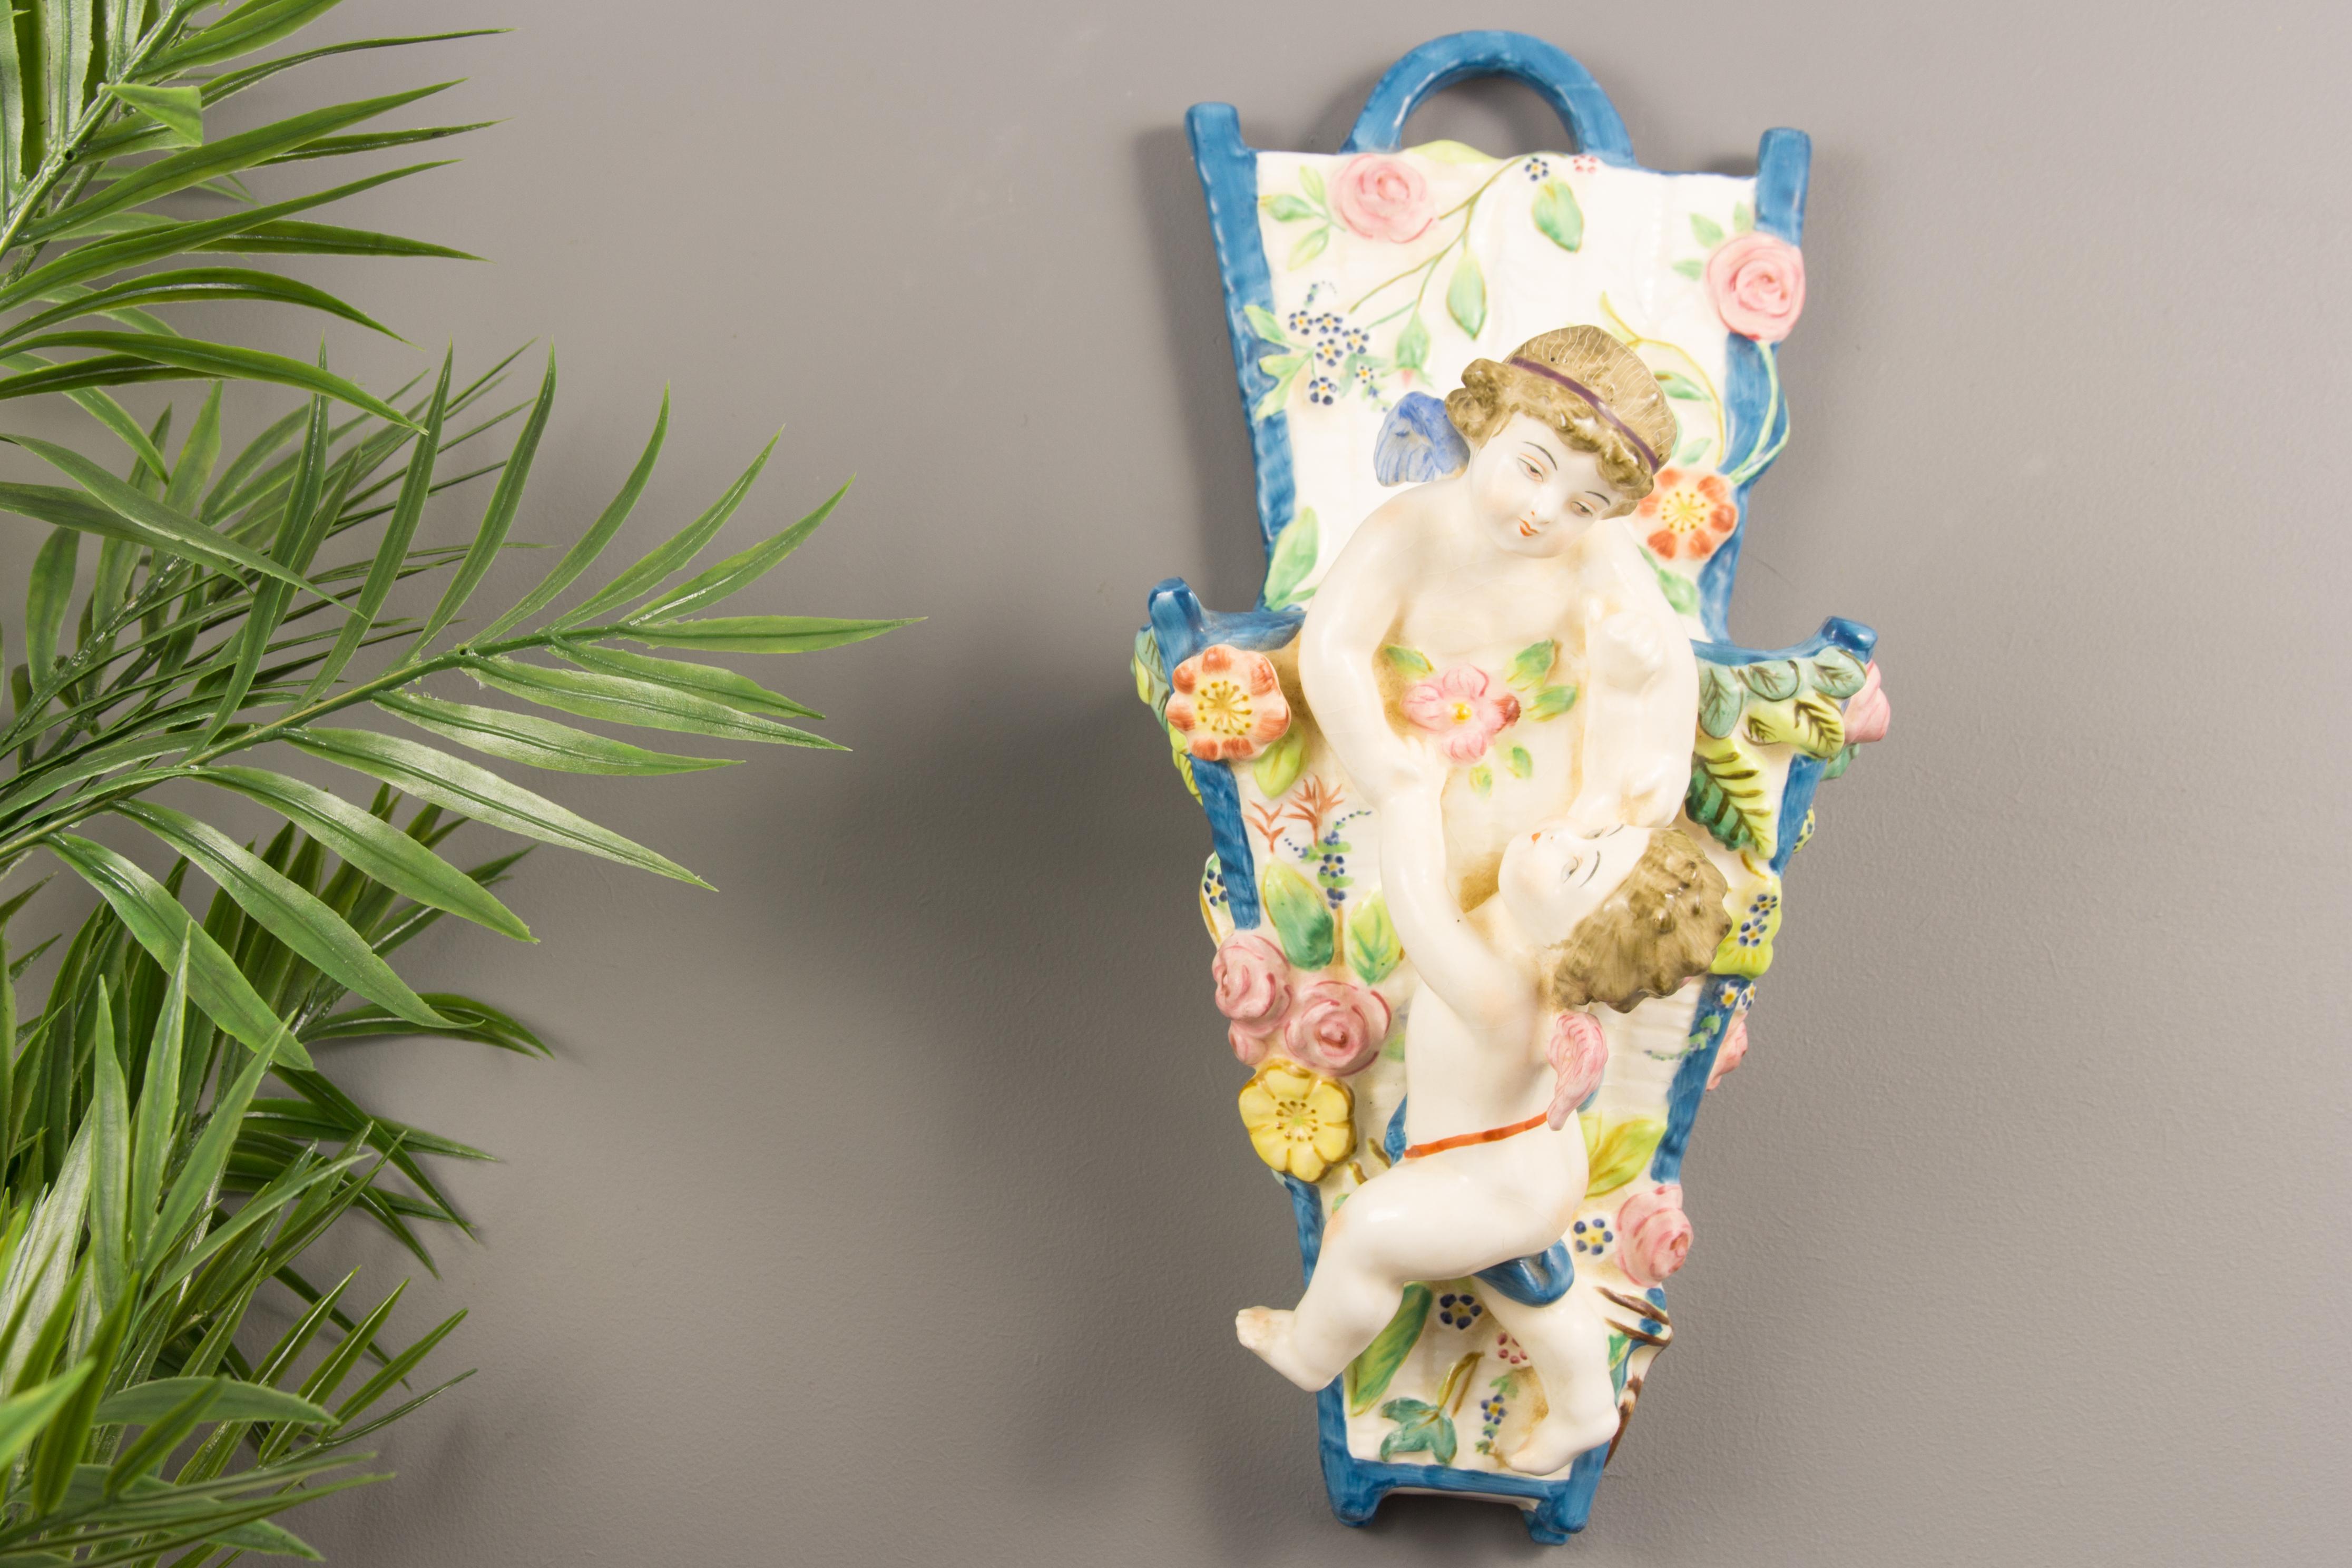 Beautiful Majolica wall pocket or vase decorated with hand painted cherubs and flowers. Made in Italy, 1950s.
Measures:
Height 30 cm / 11.81 in, width 15 cm / 5.9 in, depth 15 cm / 5.9 in.
    